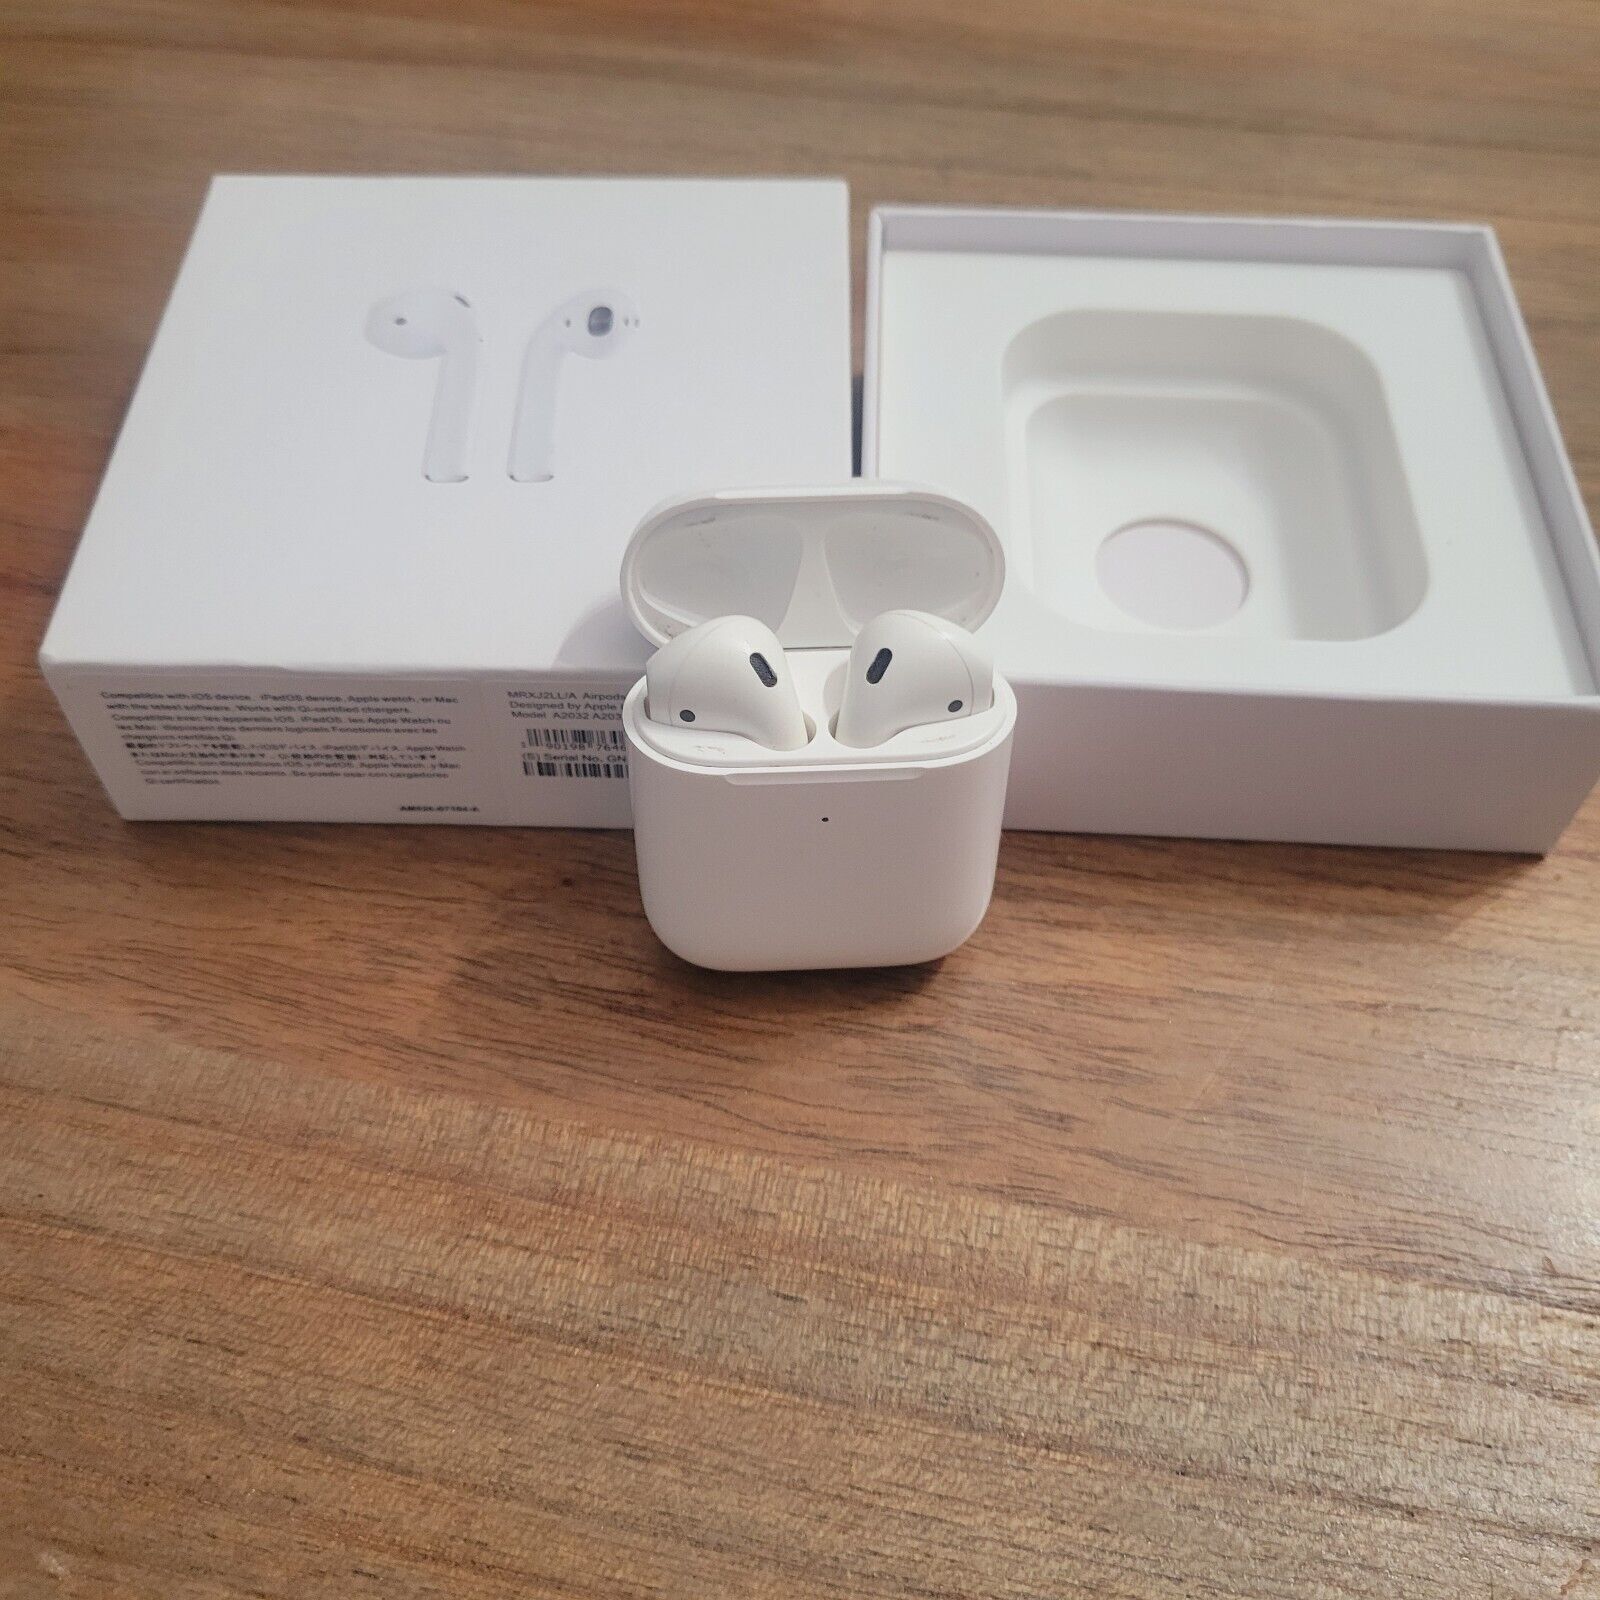 Original Apple AirPods 2nd Generation With Wired Charging Case Full Set NEW